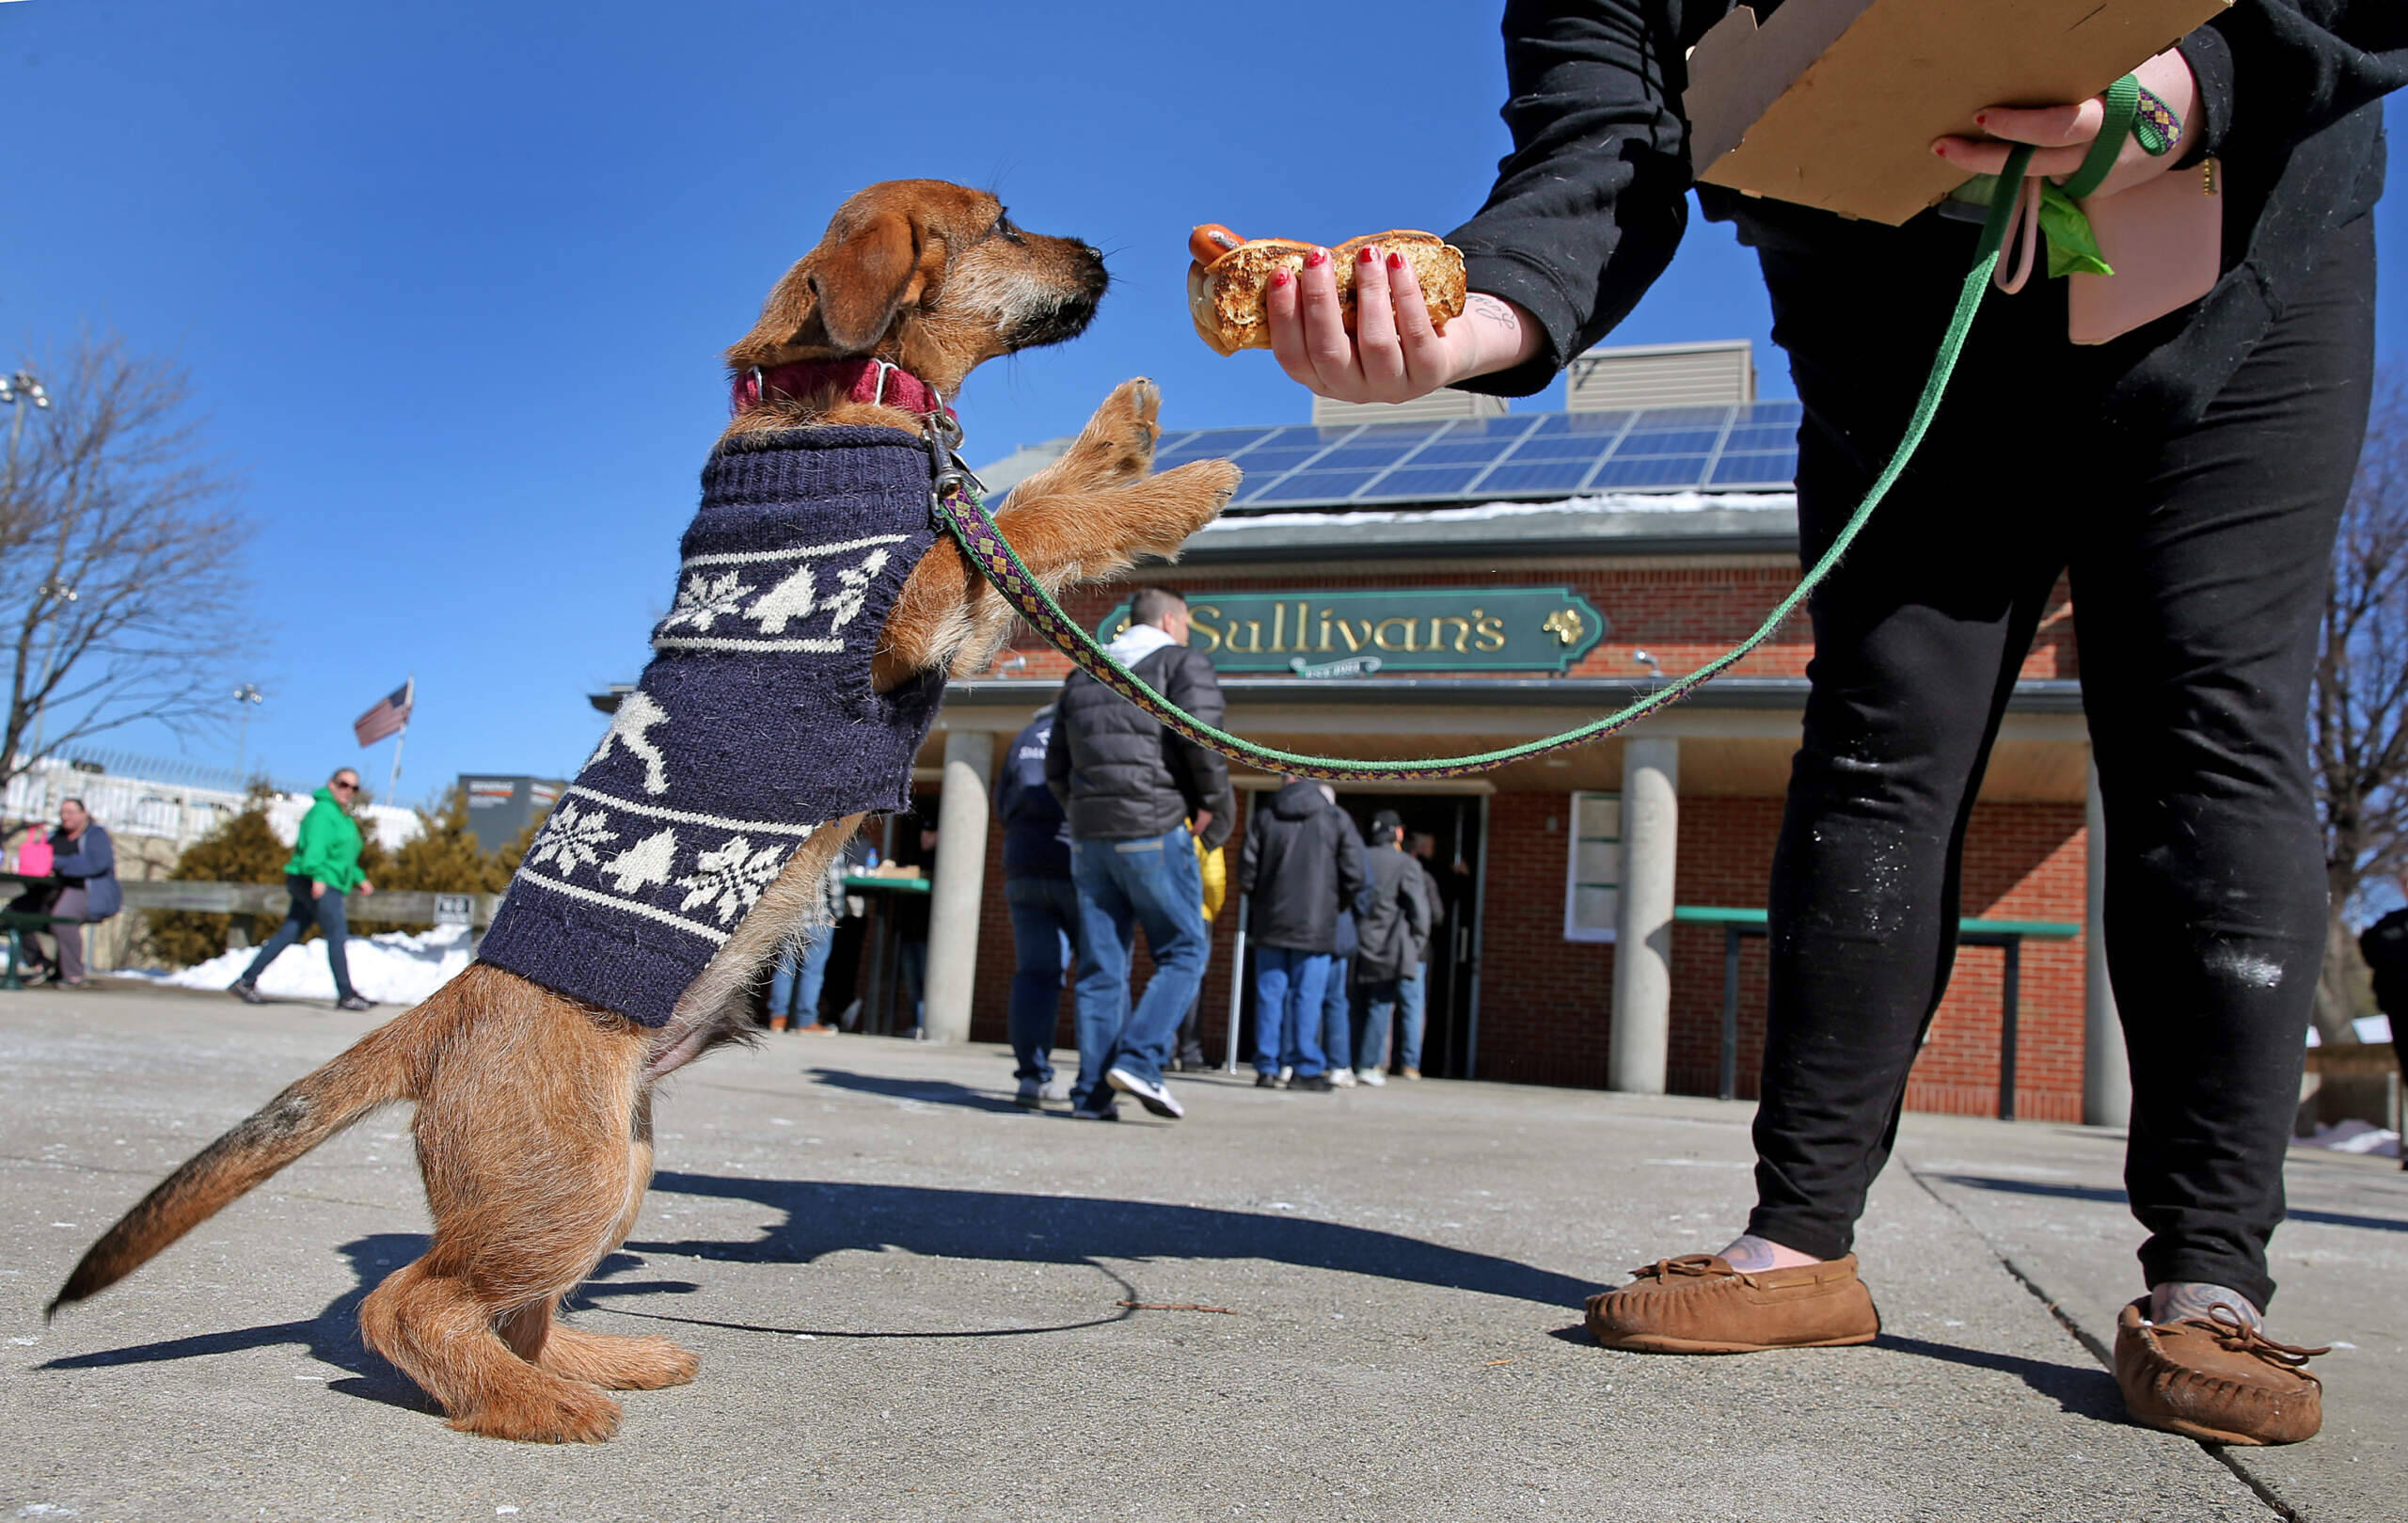 A dog named Buddy stands up for a hot dog outside Sullivan's on Castle Island in Boston in 2019. (David L. Ryan/The Boston Globe via Getty Images)